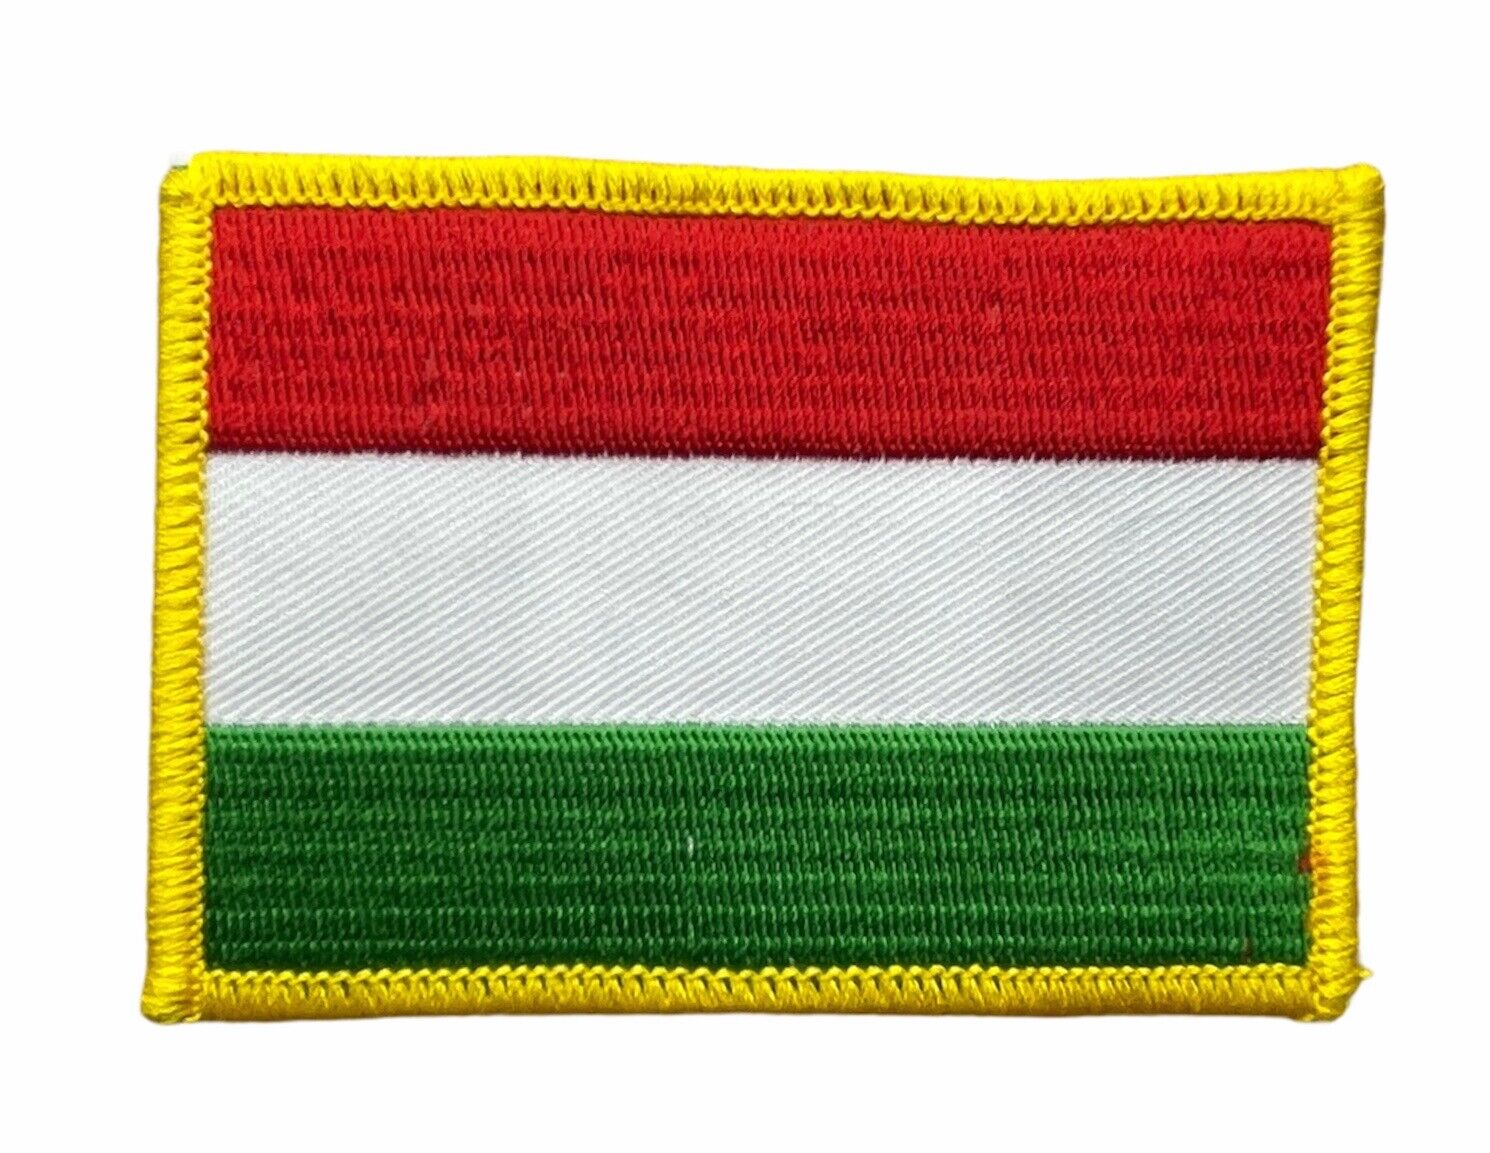 Hungary Country Of Flag 3.5 inch Patch EE6044 F6D34L